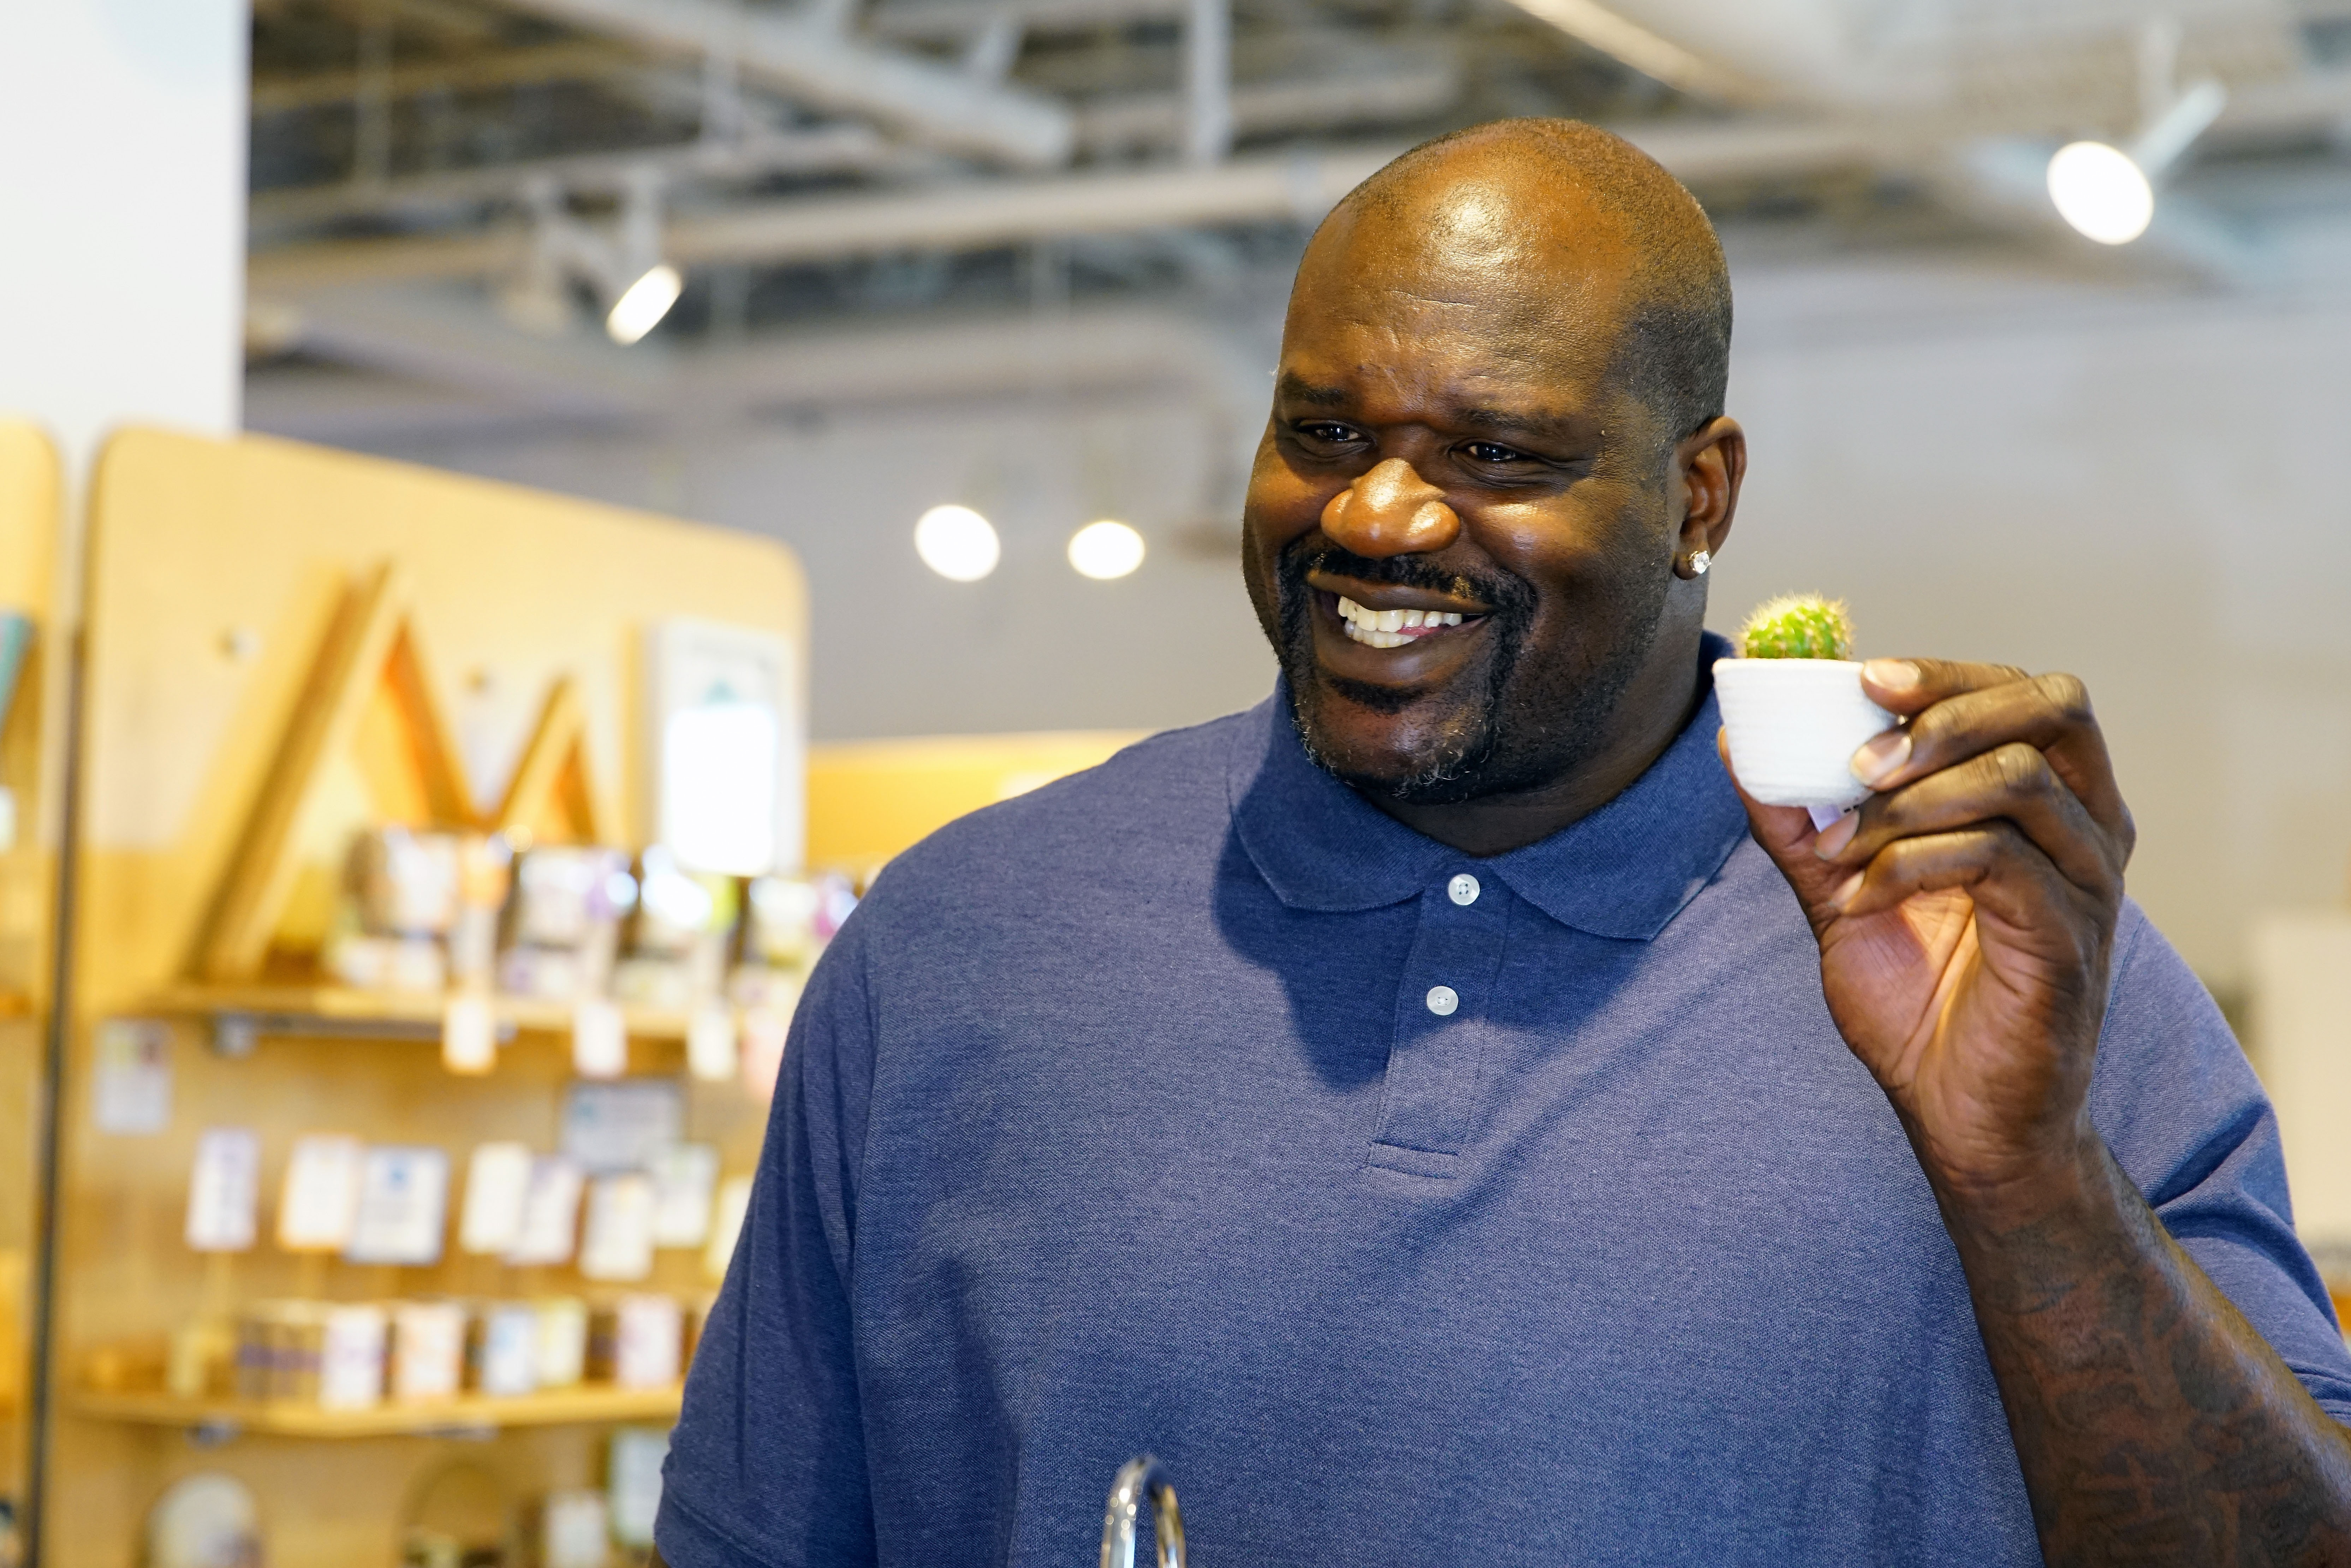 Shaquille O’Neal’s Classic 1994 Video Game “Shaq Fu” Gets Reboot